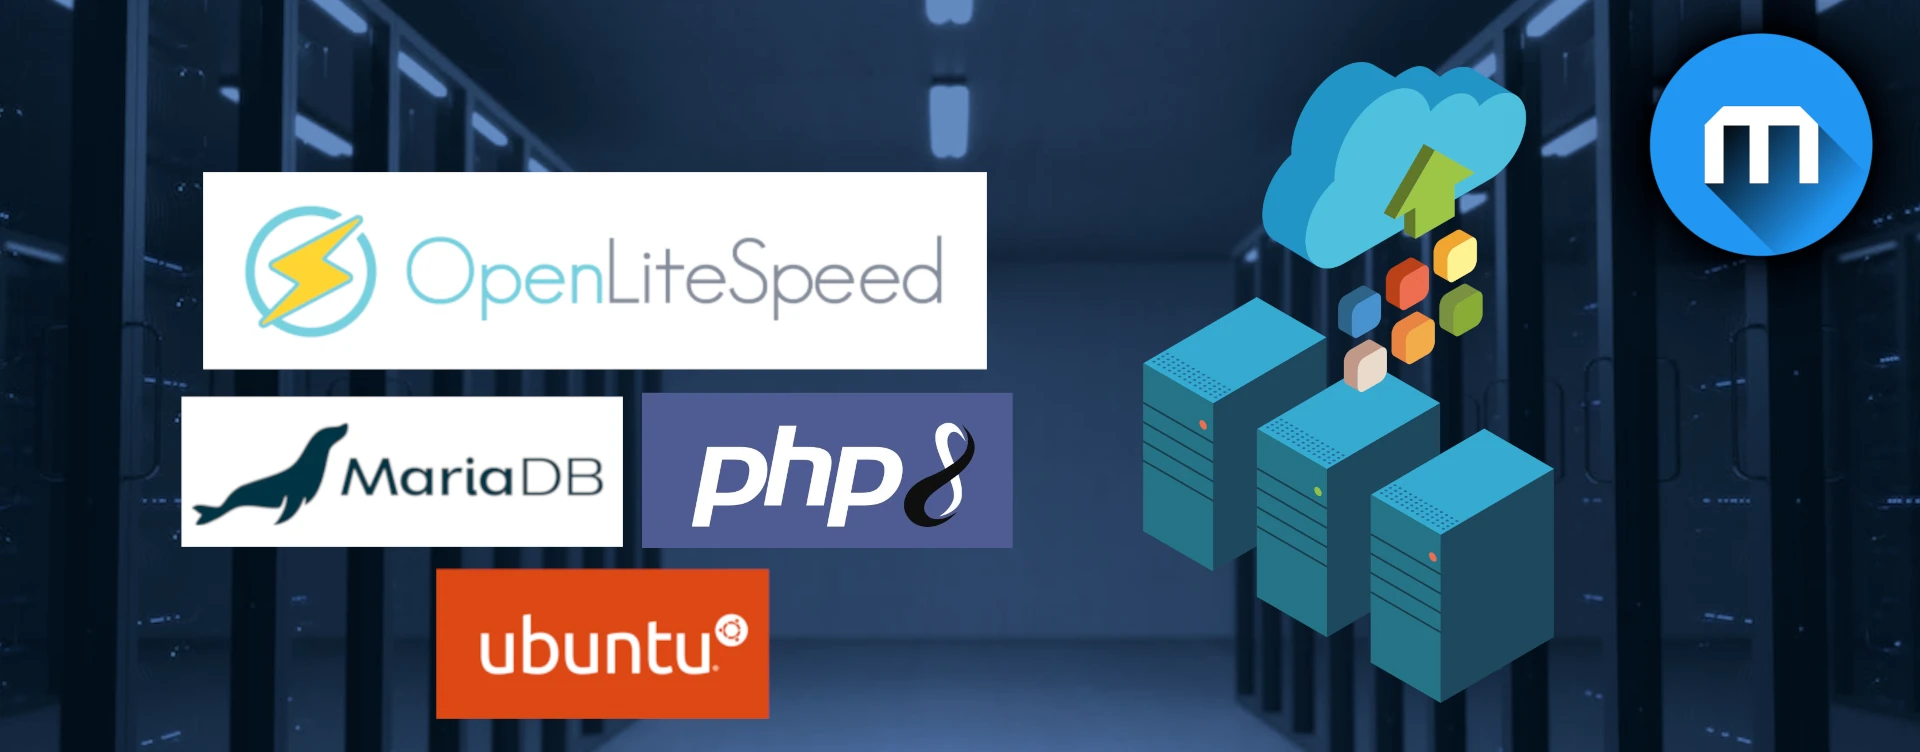 How To Install Linux, OpenLiteSpeed, MariaDB, PHP (LOMP stack) on Ubuntu 20.04